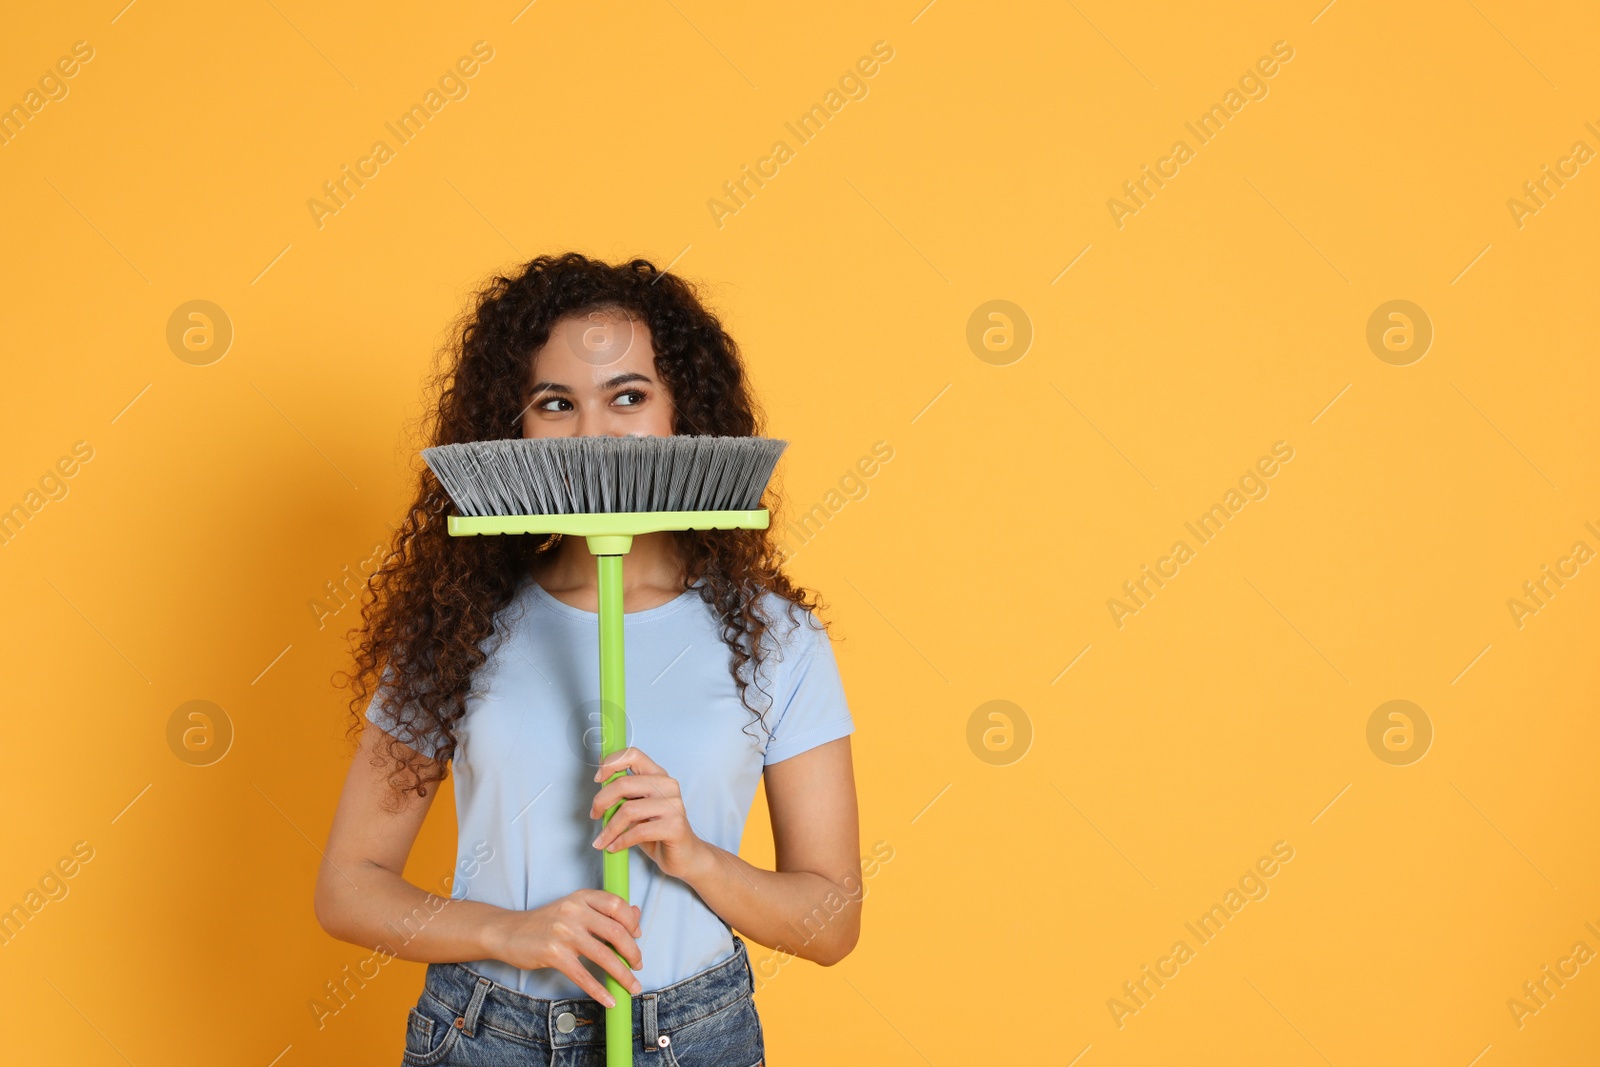 Photo of African American woman with green broom on orange background, space for text